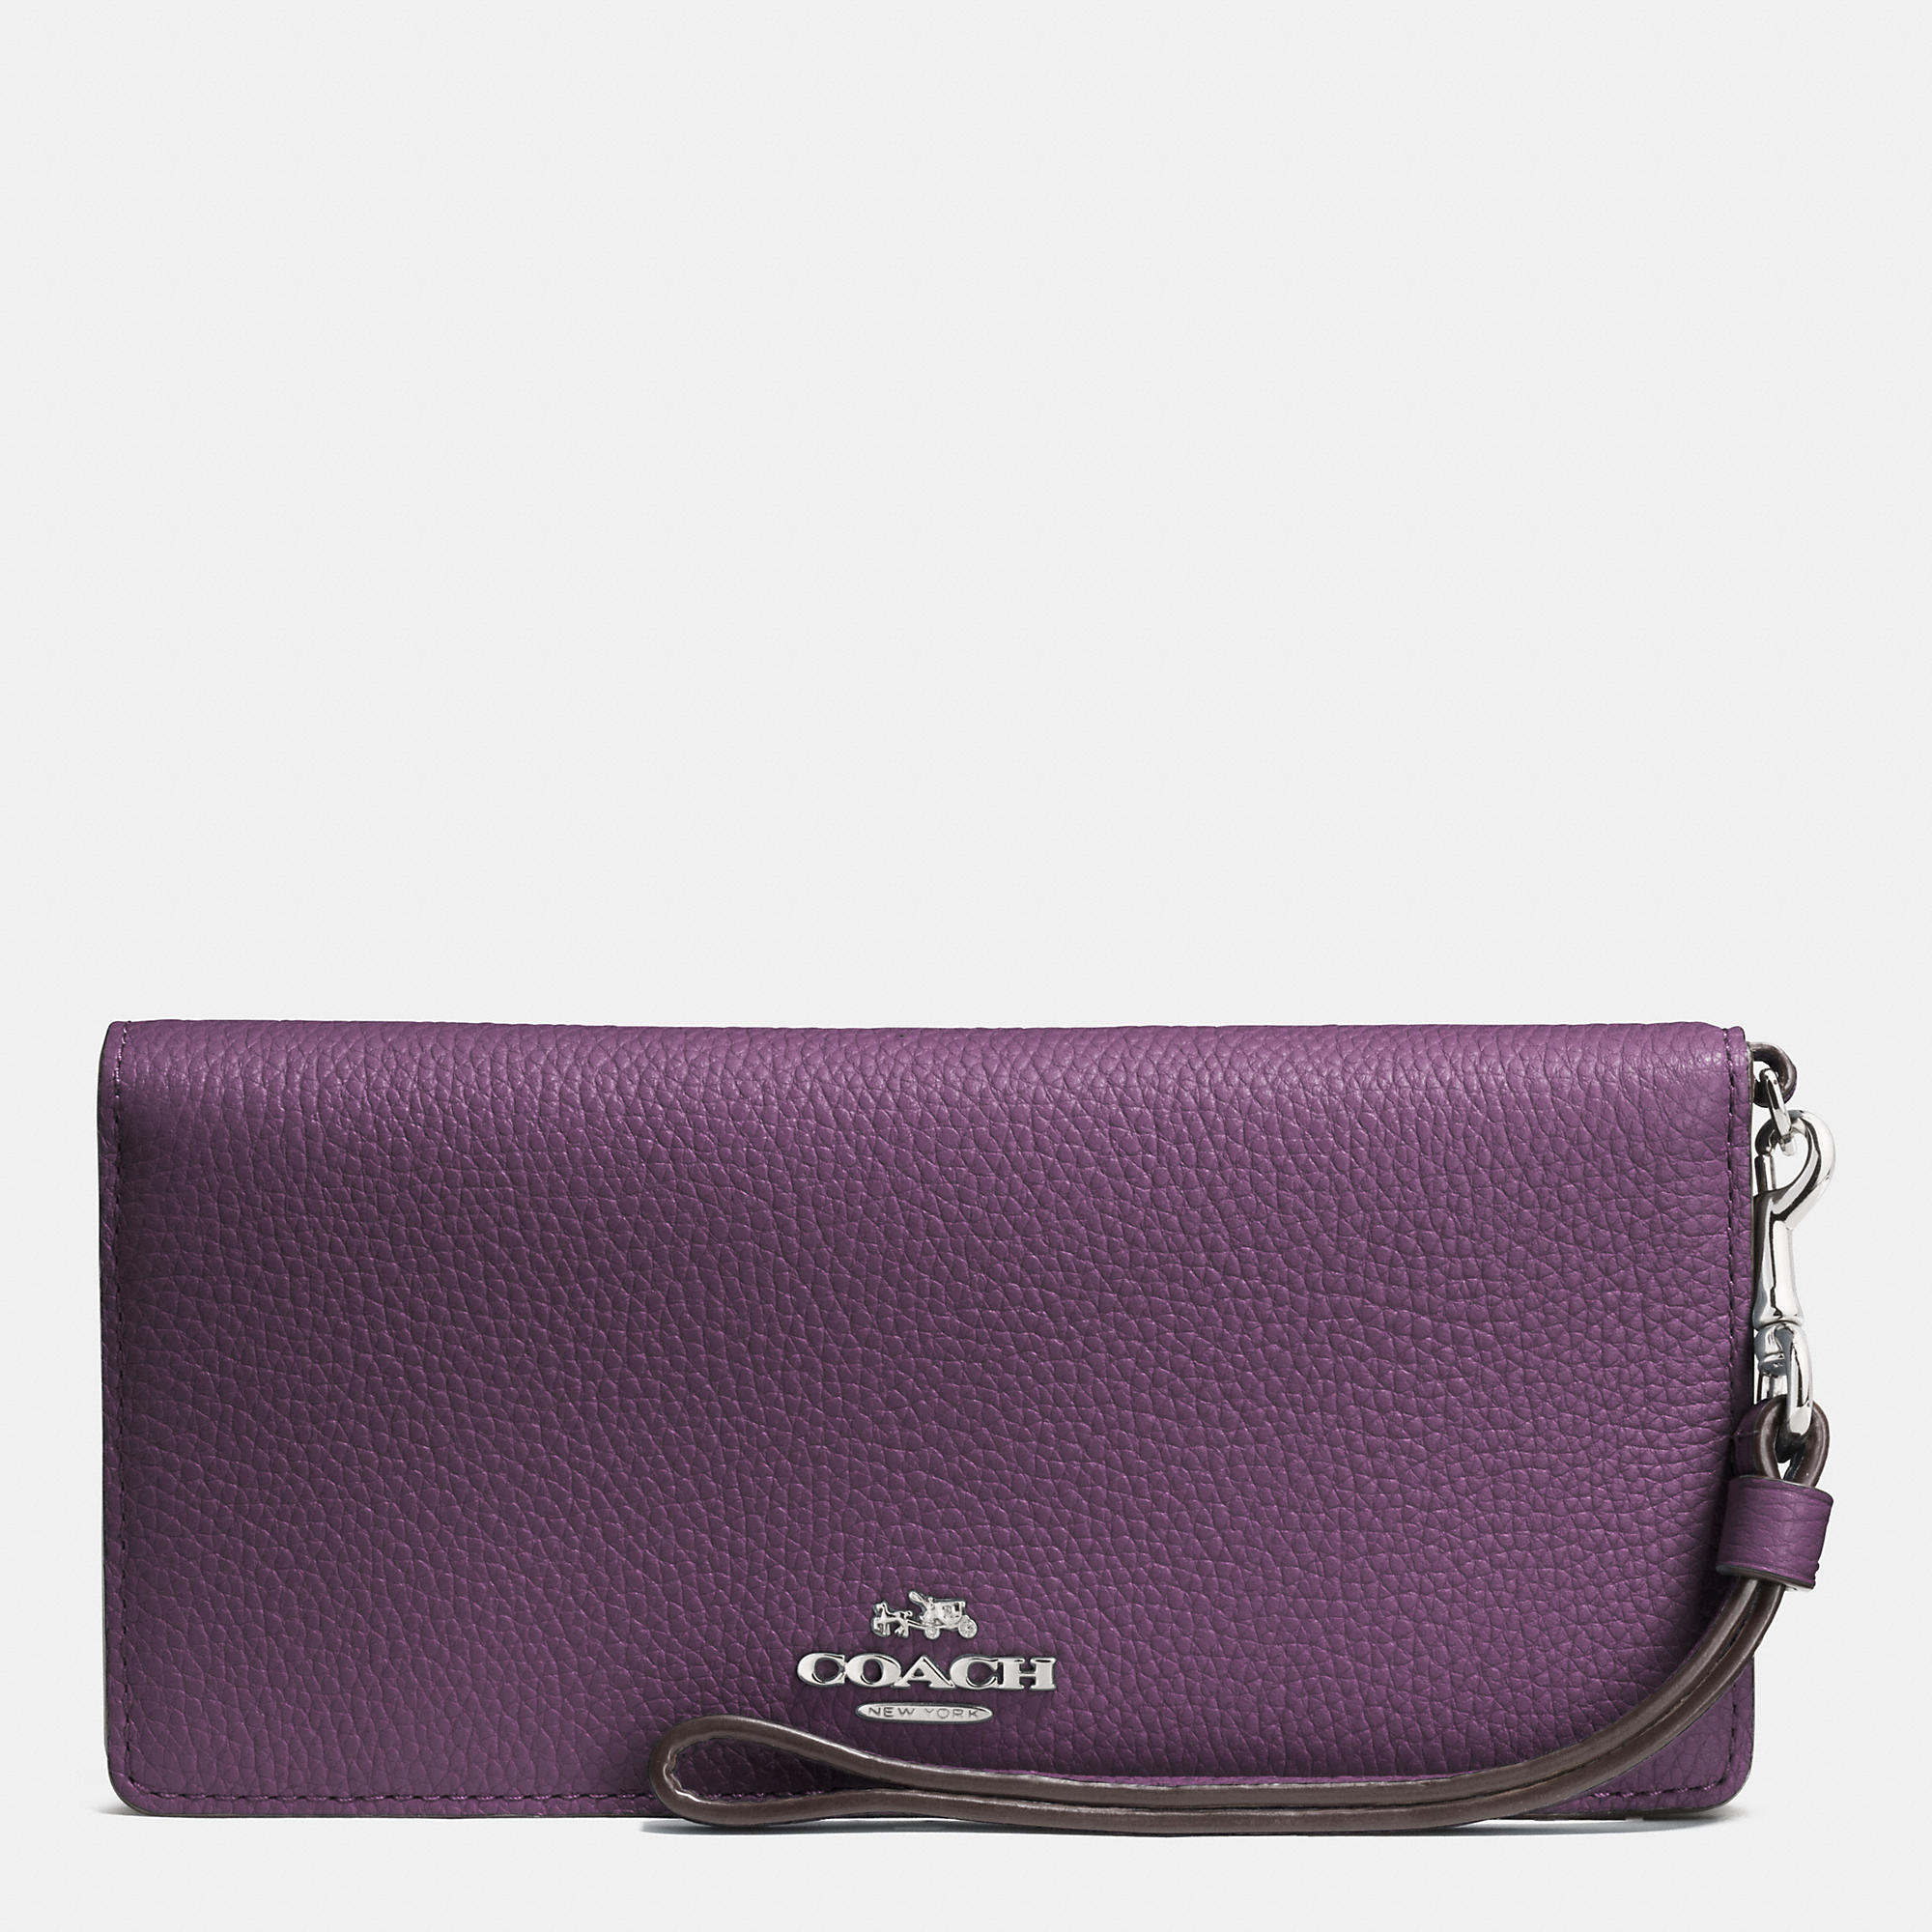 Fashion Women Real Coach Slim Wallet In Colorblock Leather [Coach Outlet 2914] - $46.75 : Coach ...